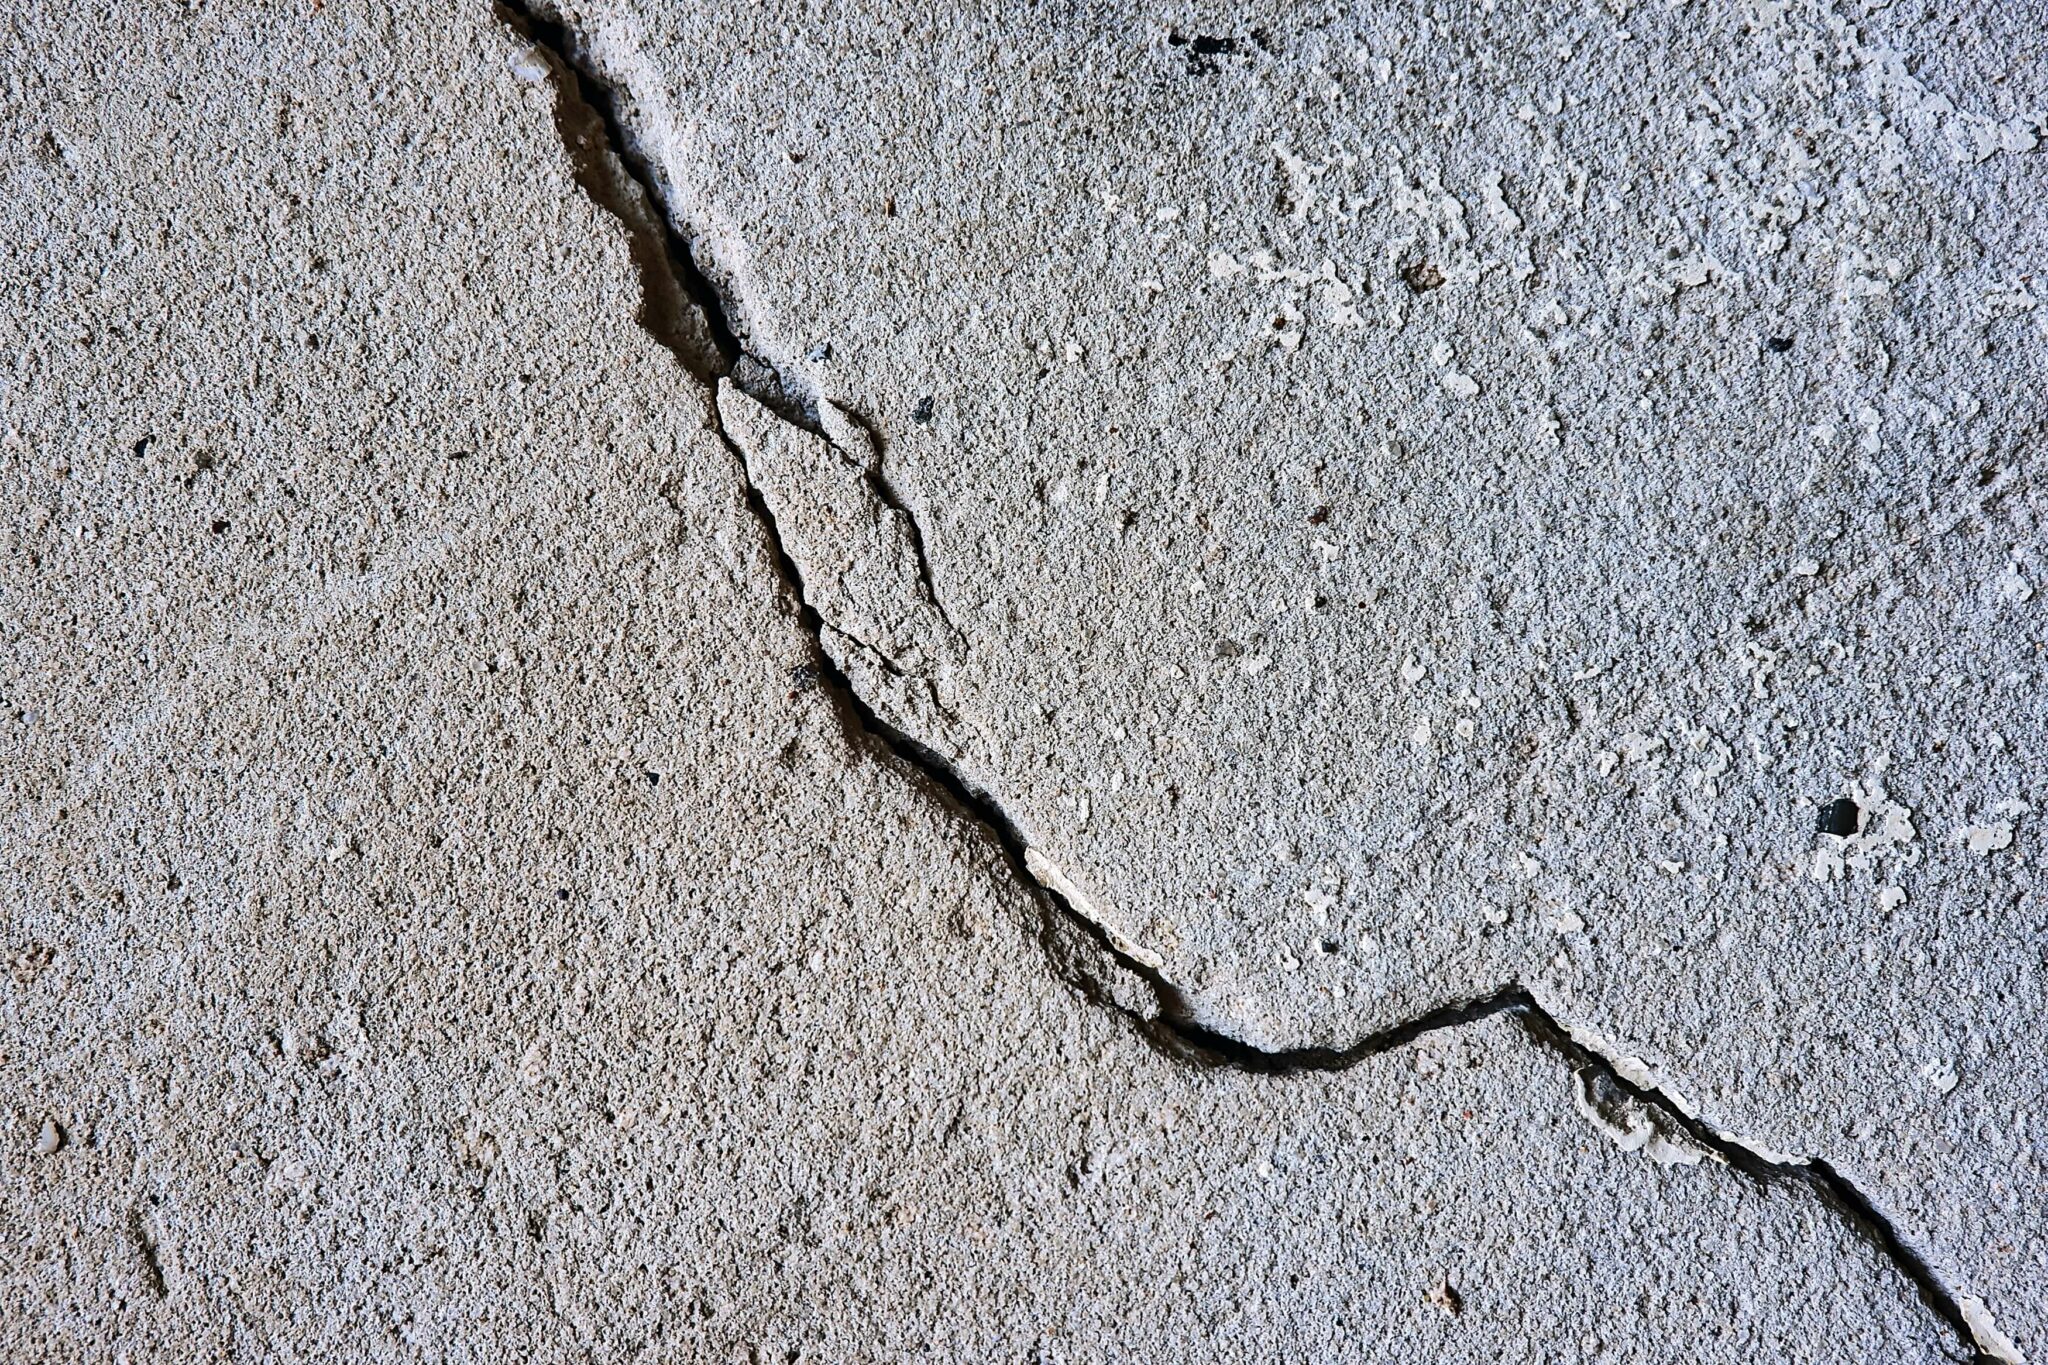 A crack in the cement.